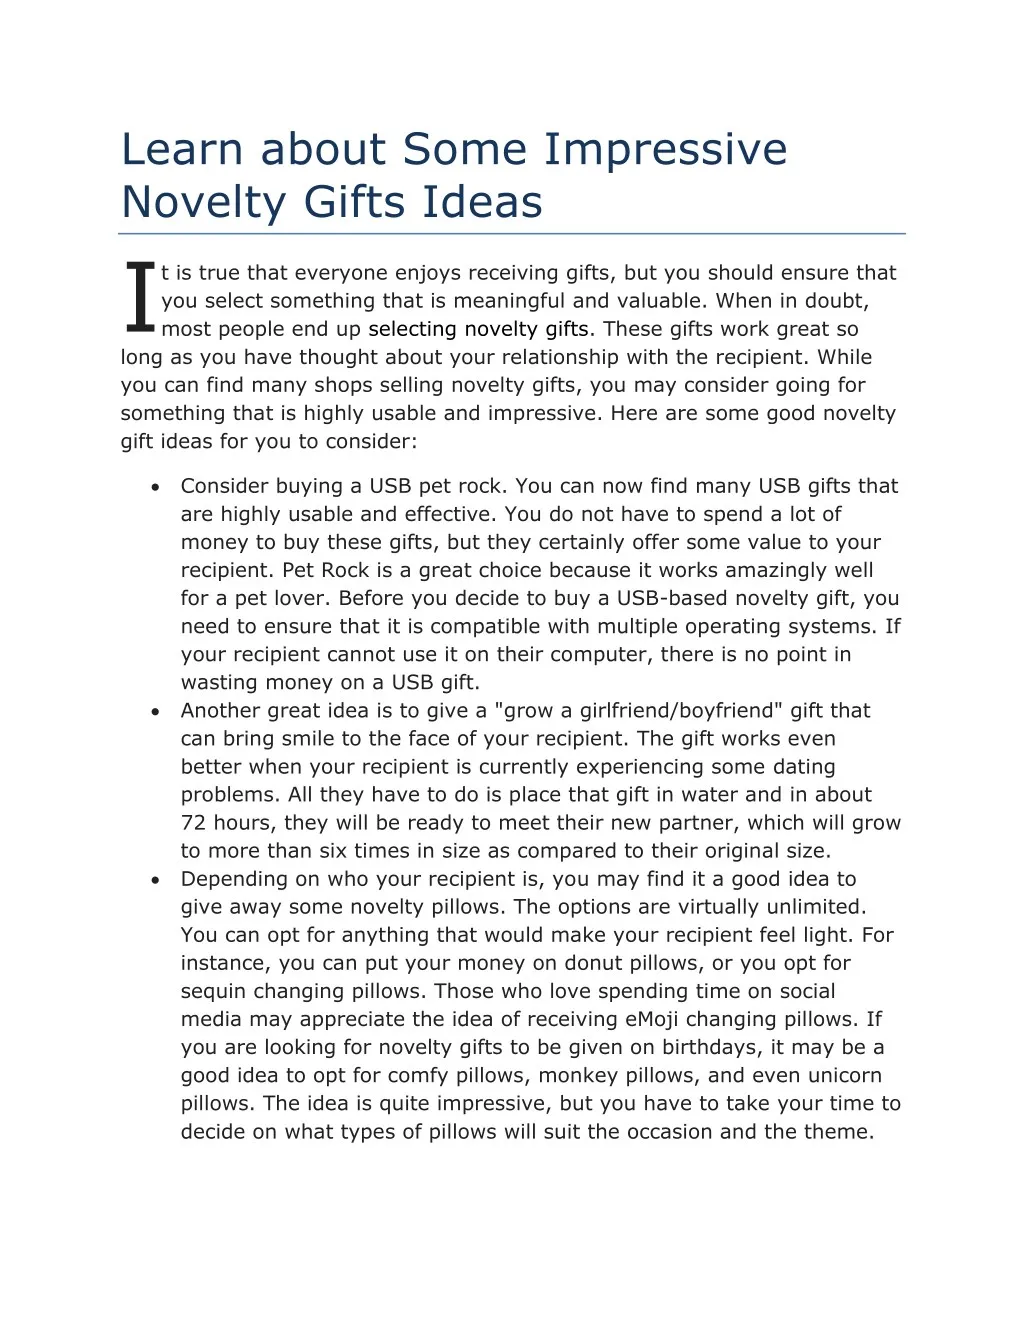 learn about some impressive novelty gifts ideas i